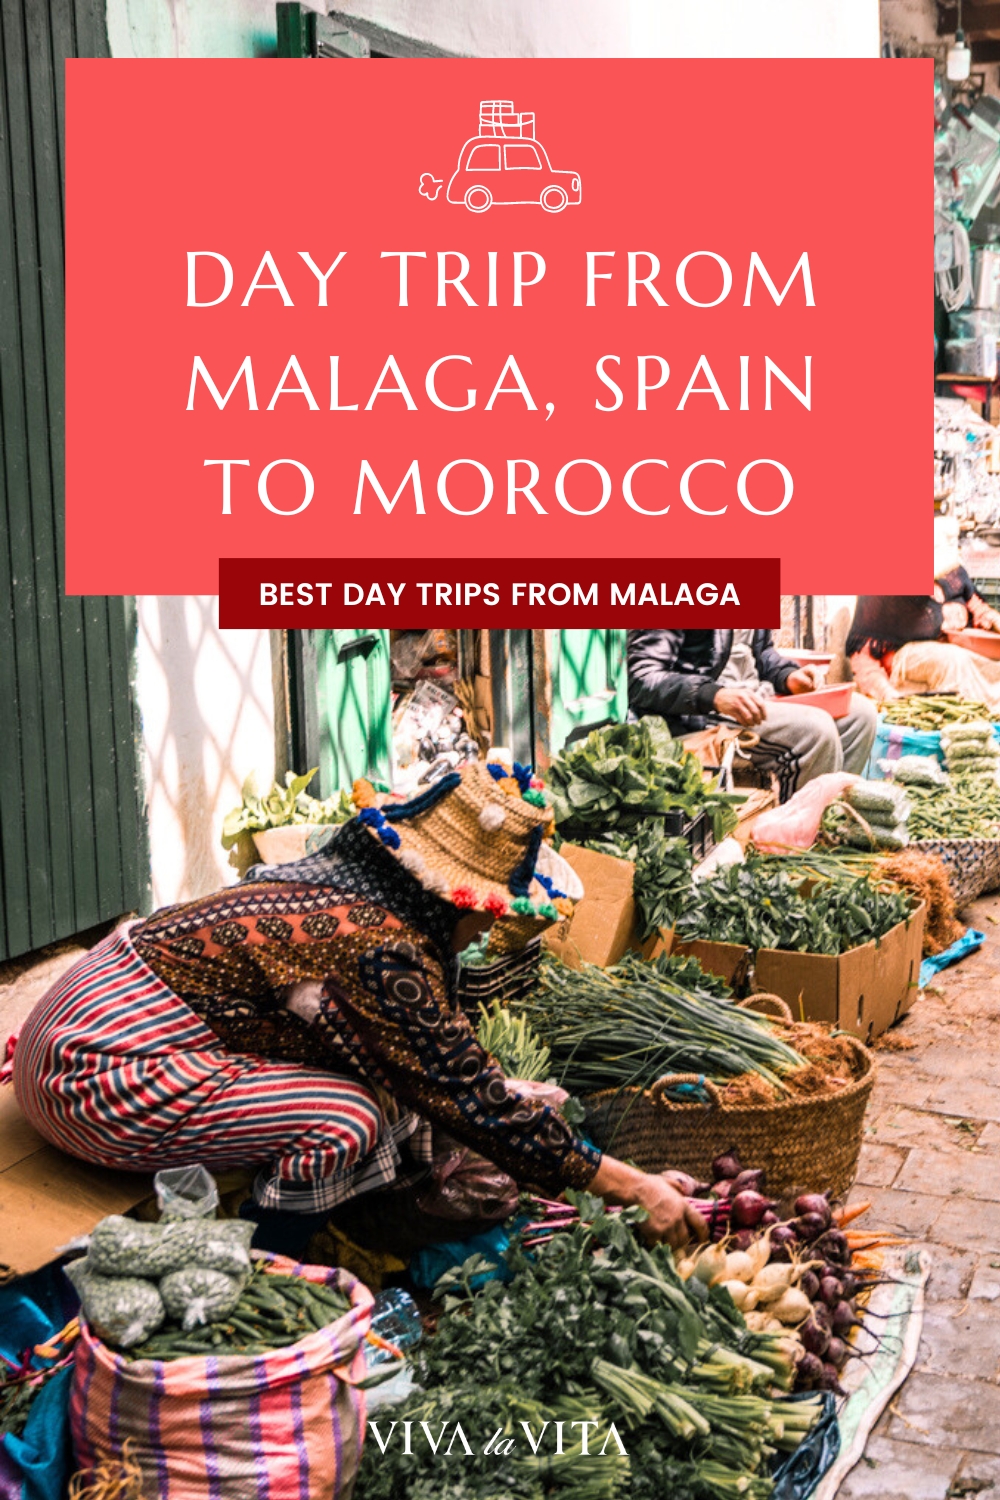 pinterest image showing a seller at the Medina in Tetouan, Morocco with a headline: day trip from malaga spain to morocco, best day trips from malaga